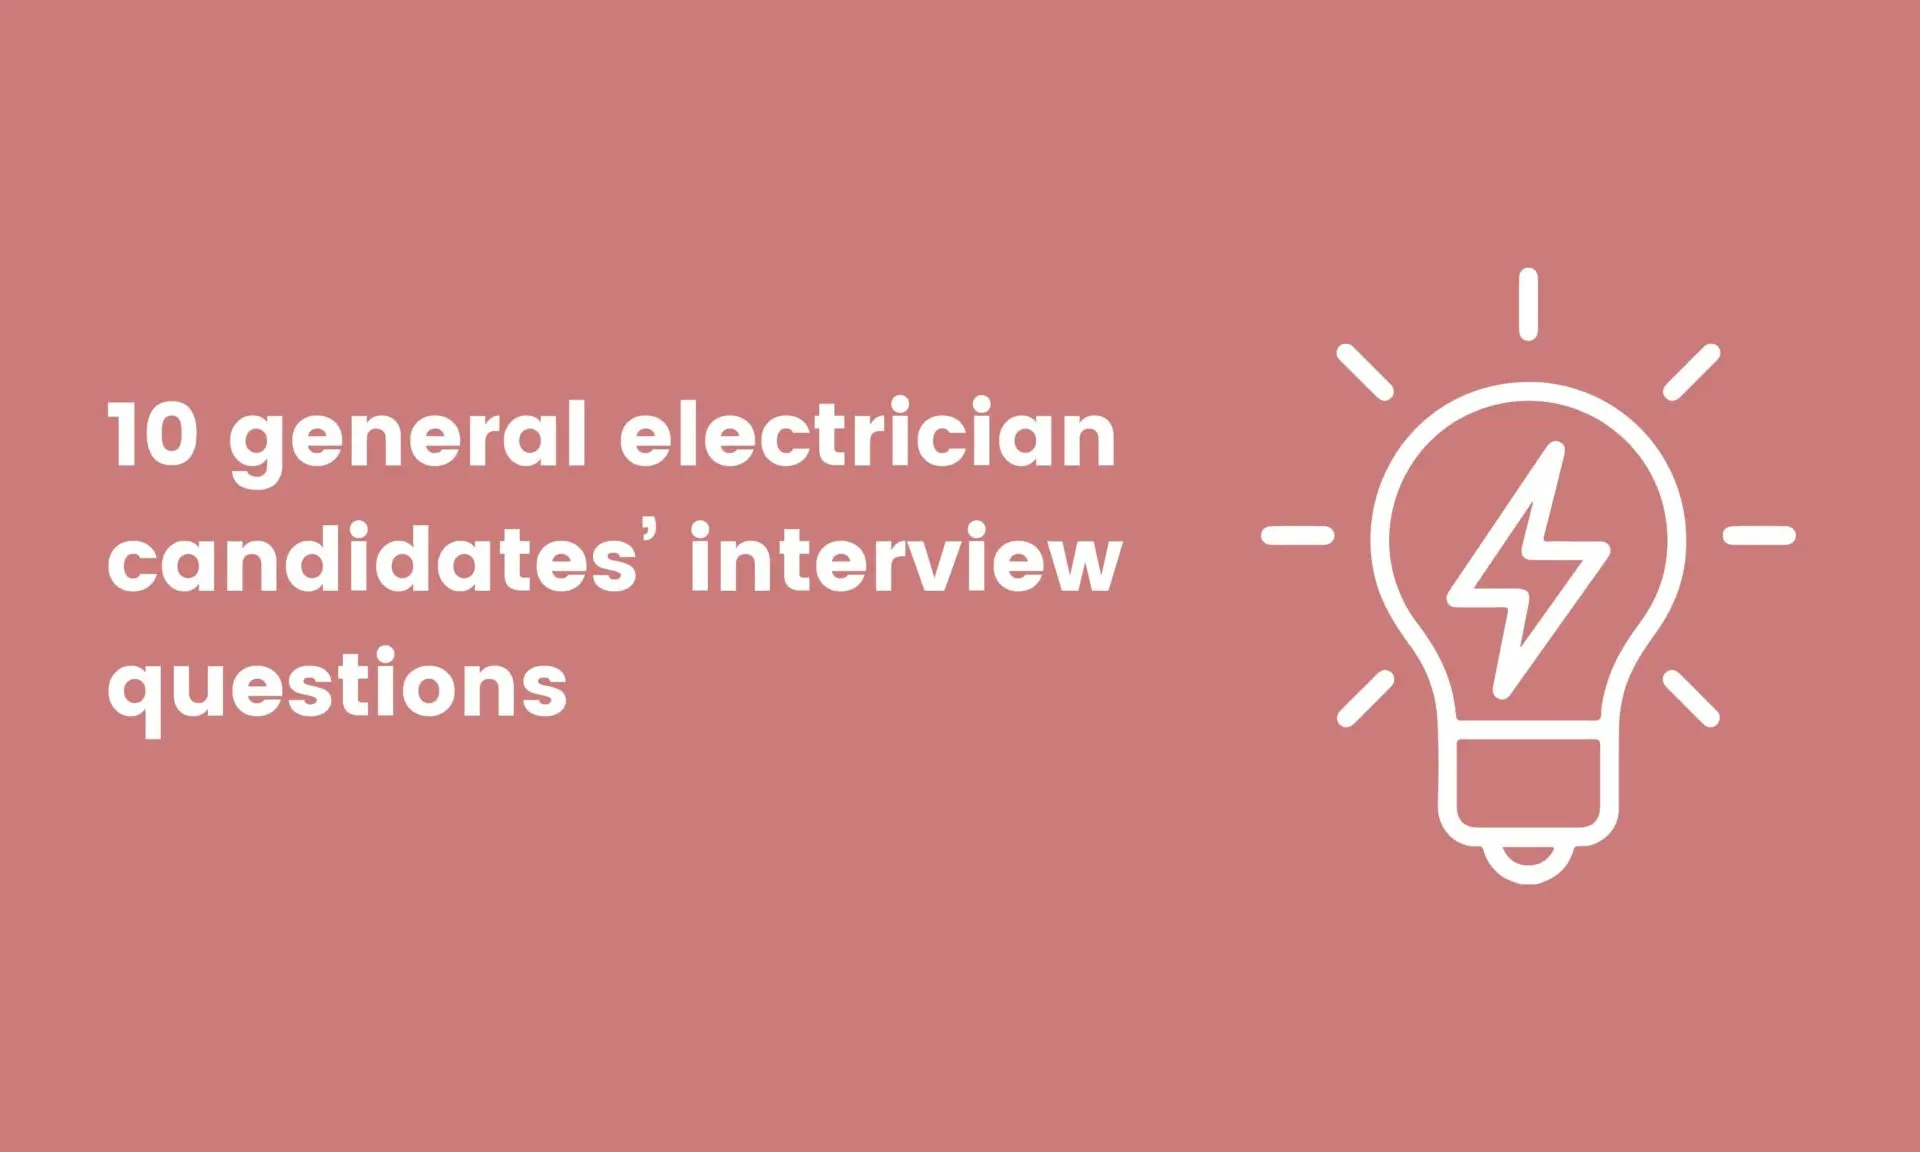 banner image for 10 general electrician candidates’ interview questions